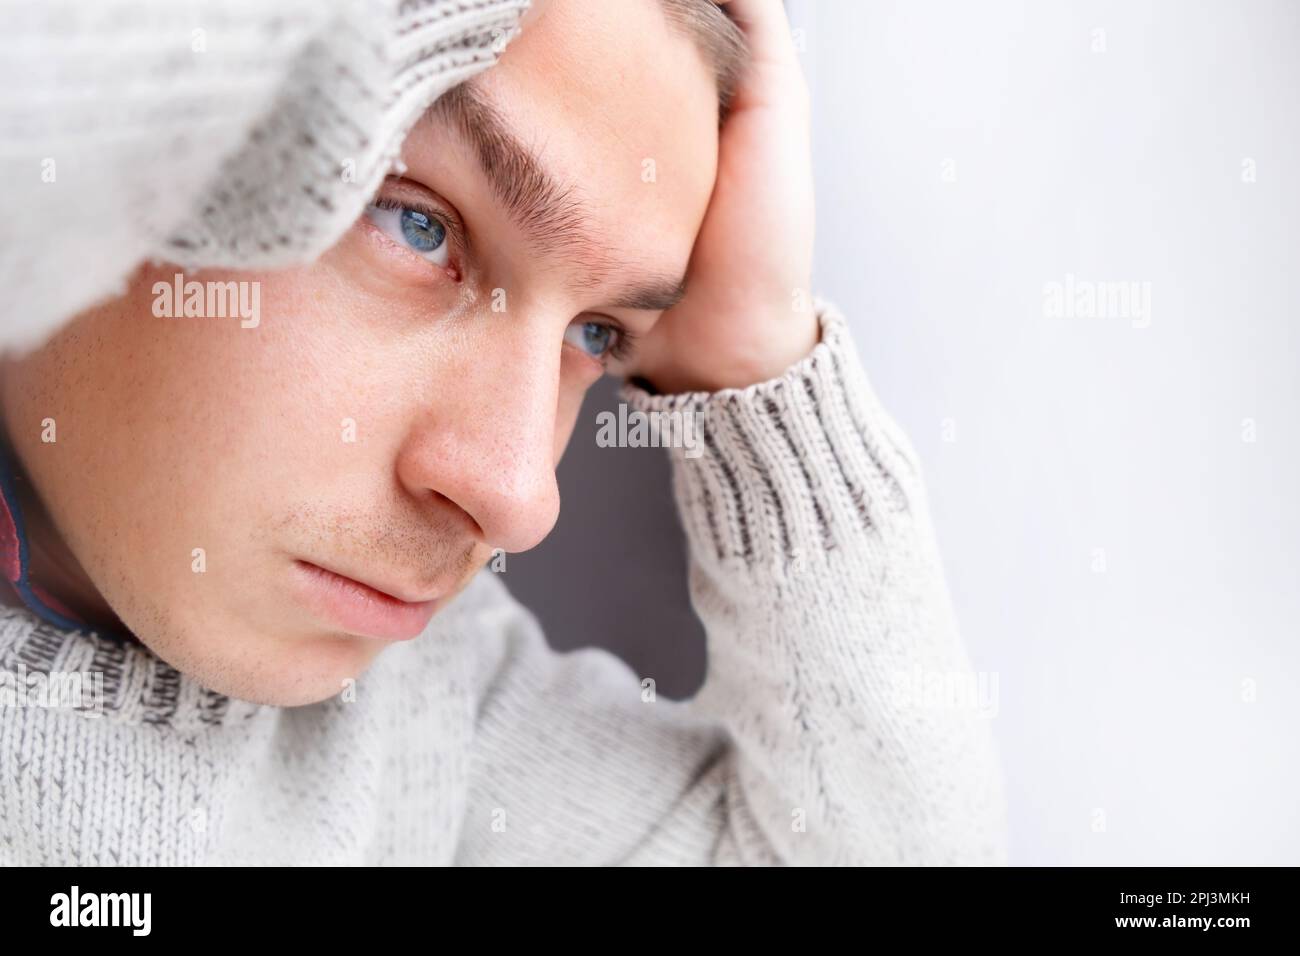 Sad Young Man Portrait at the Home by the Wall closeup Stock Photo